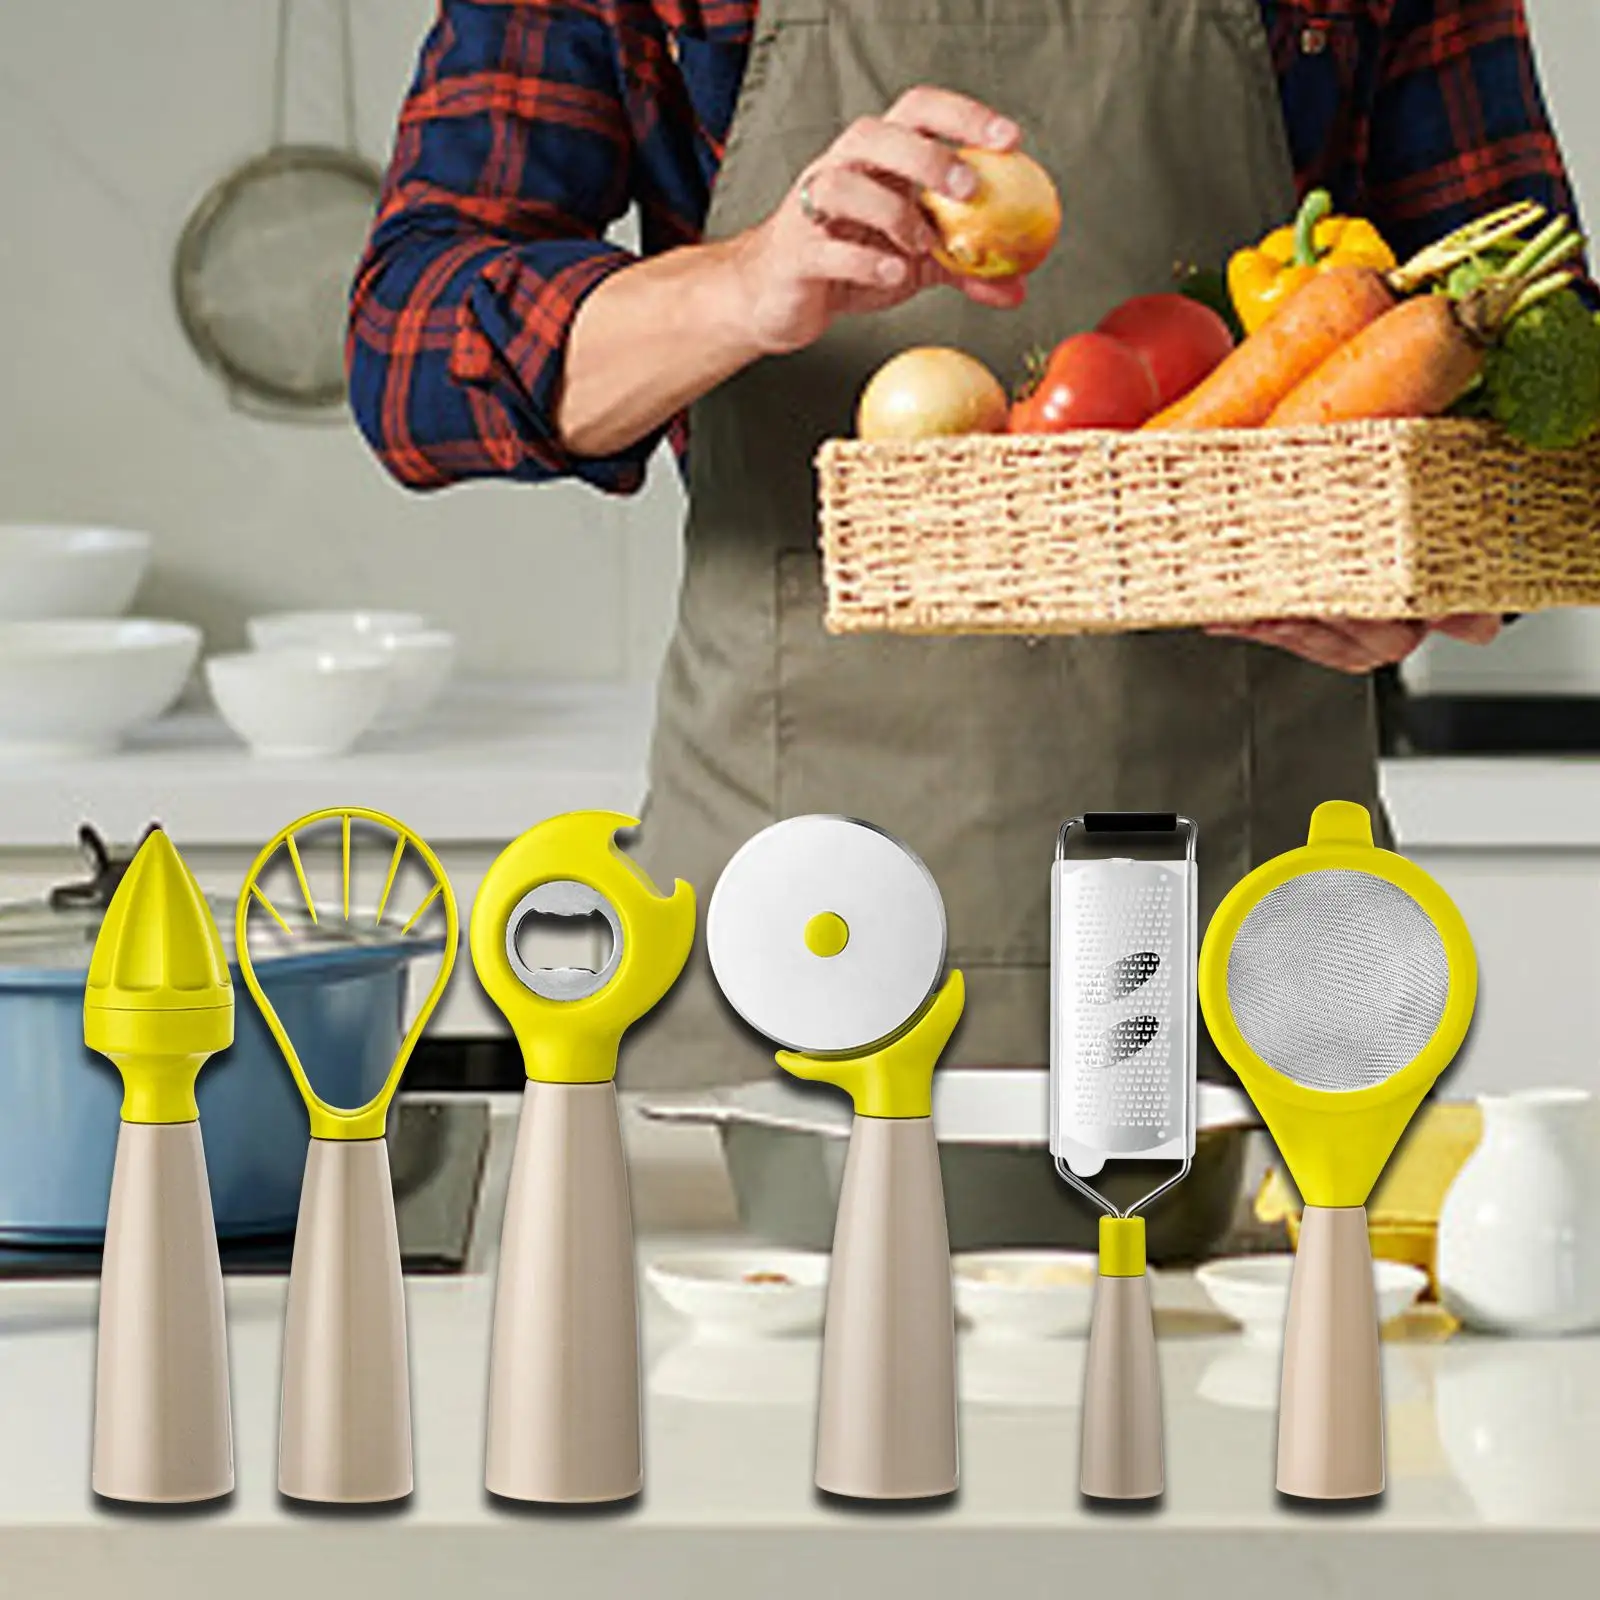 6Pcs Kitchen Tools Set Fruit Extractor Strainer Juicer Bottle Opener Space Saving for Garlic RV Cheese Vegetable Accessories